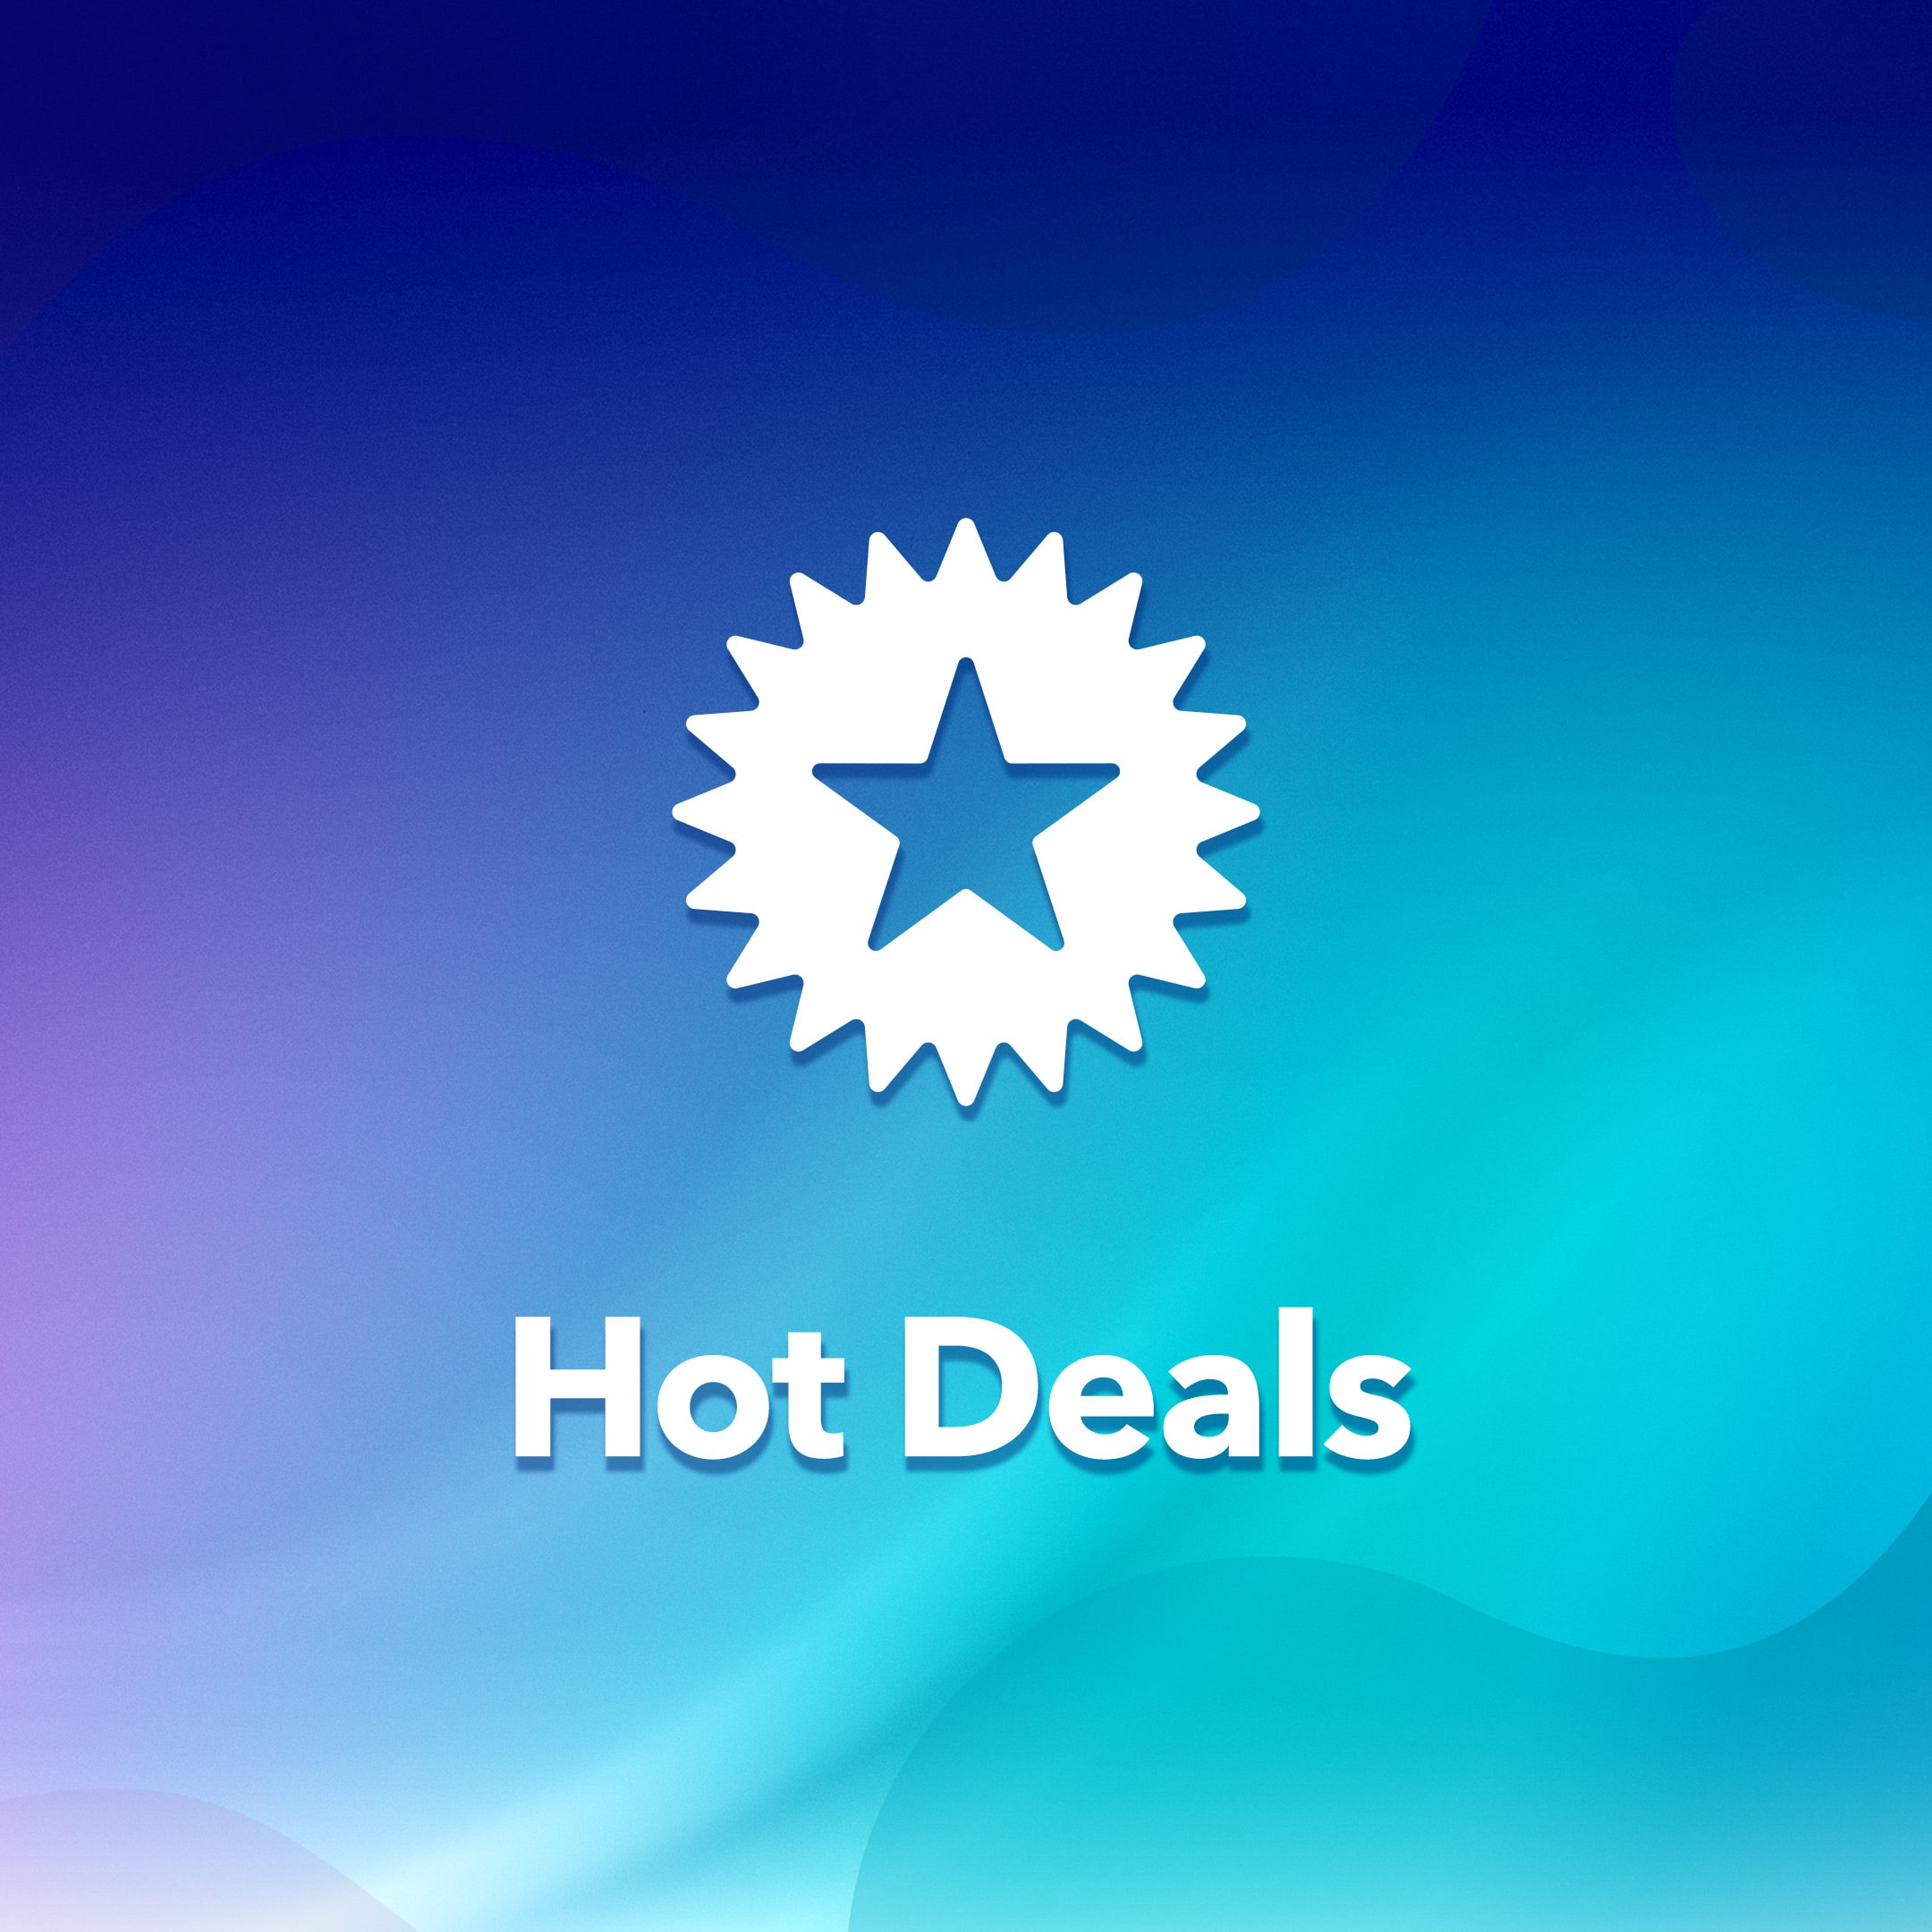 [PROMO] Days of Play 2022 - Hot Deals